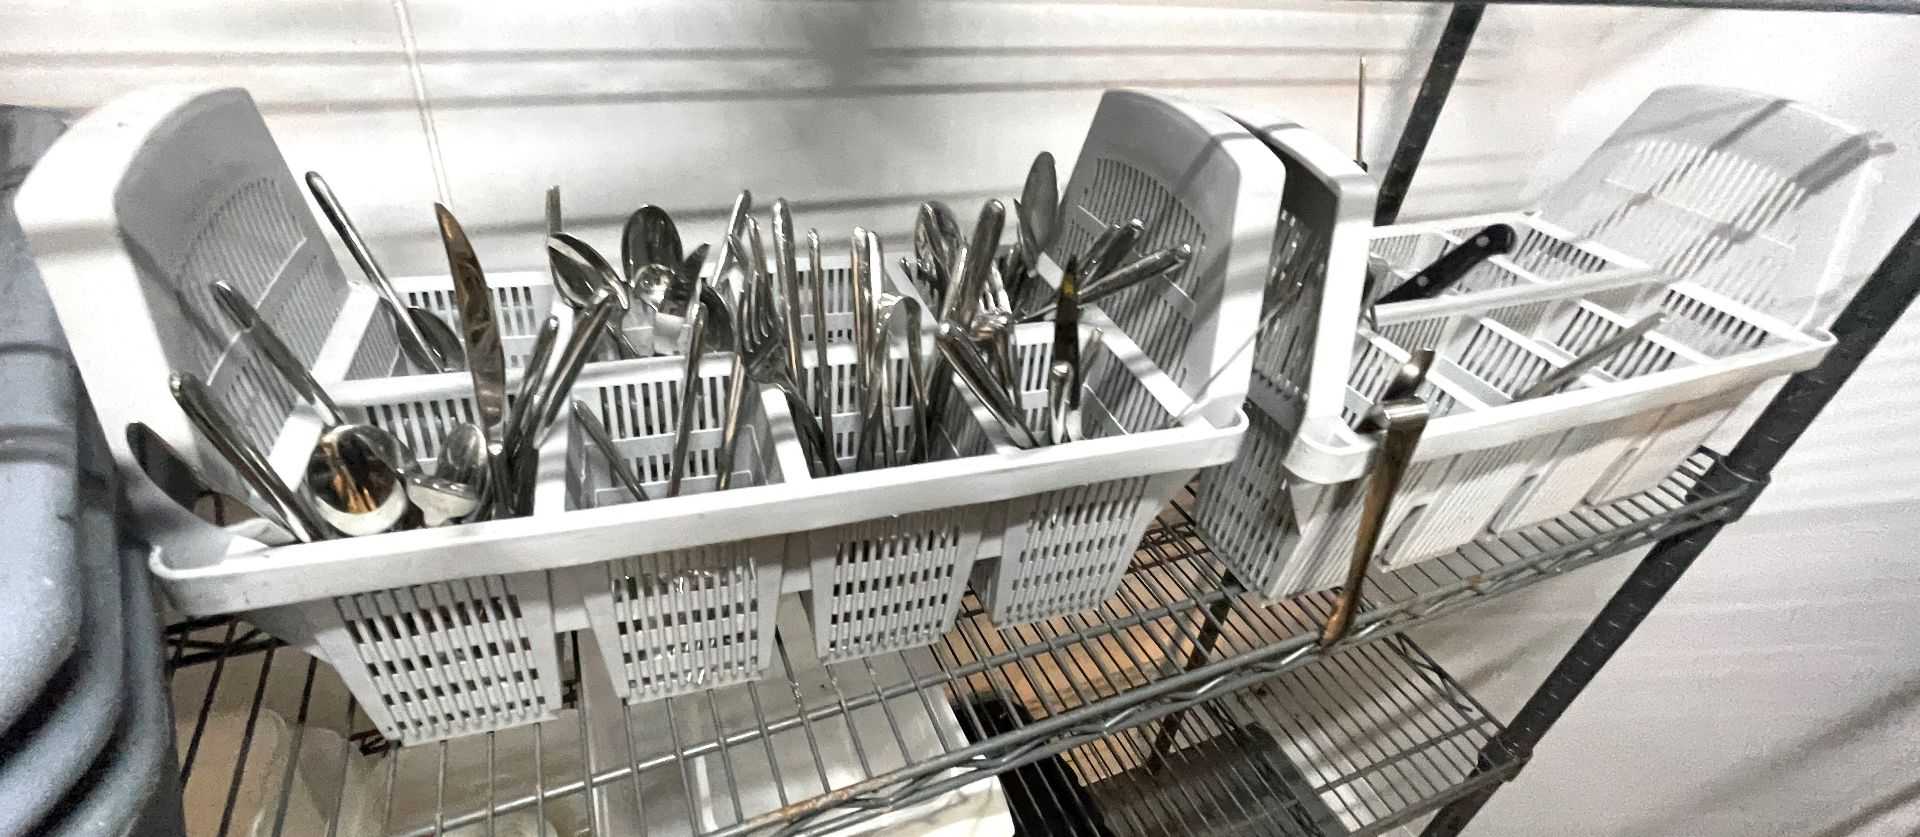 2 x Dishwasher Cutlery Rack Baskets with a Collection of Cutley and Three Wash Bowls - Image 4 of 4